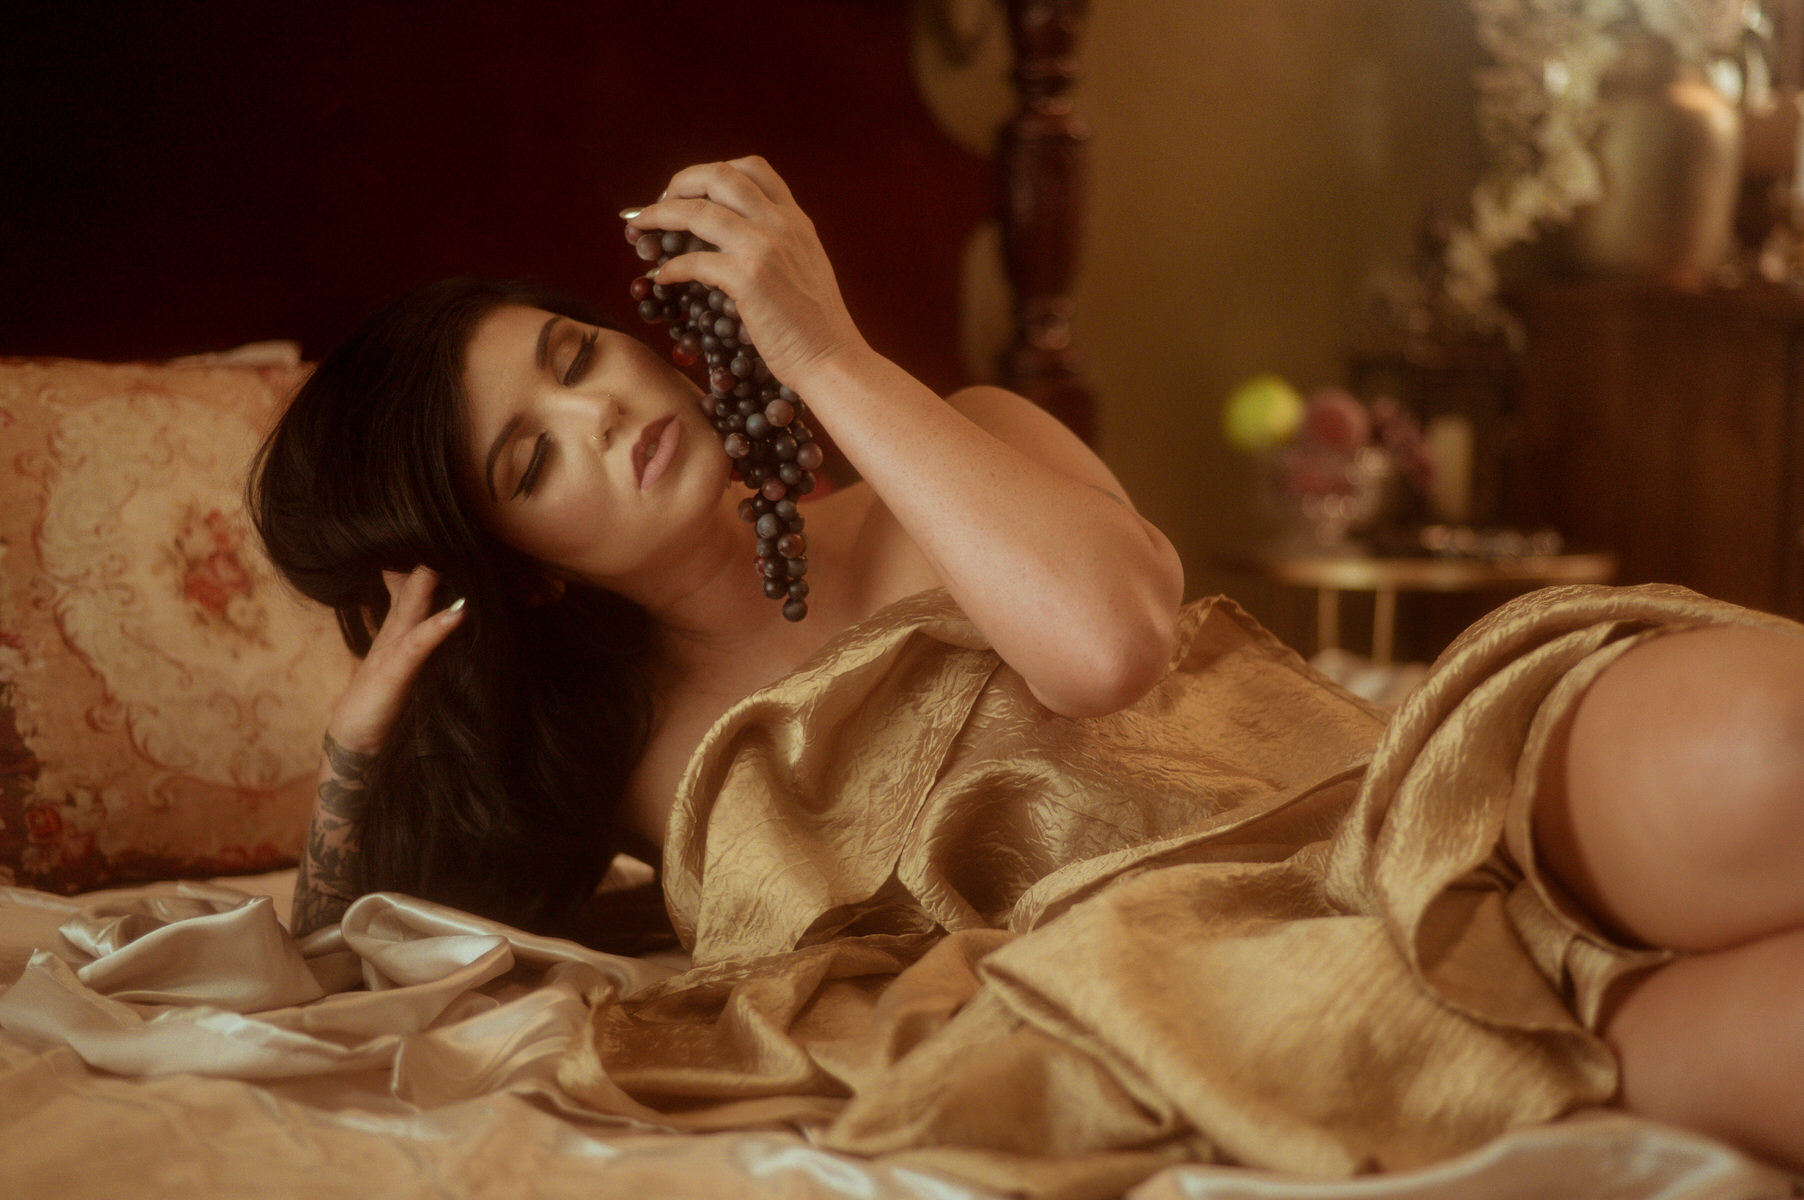 A woman in a gold dress, posing artfully on a bed in an exquisite display of fine art boudoir.